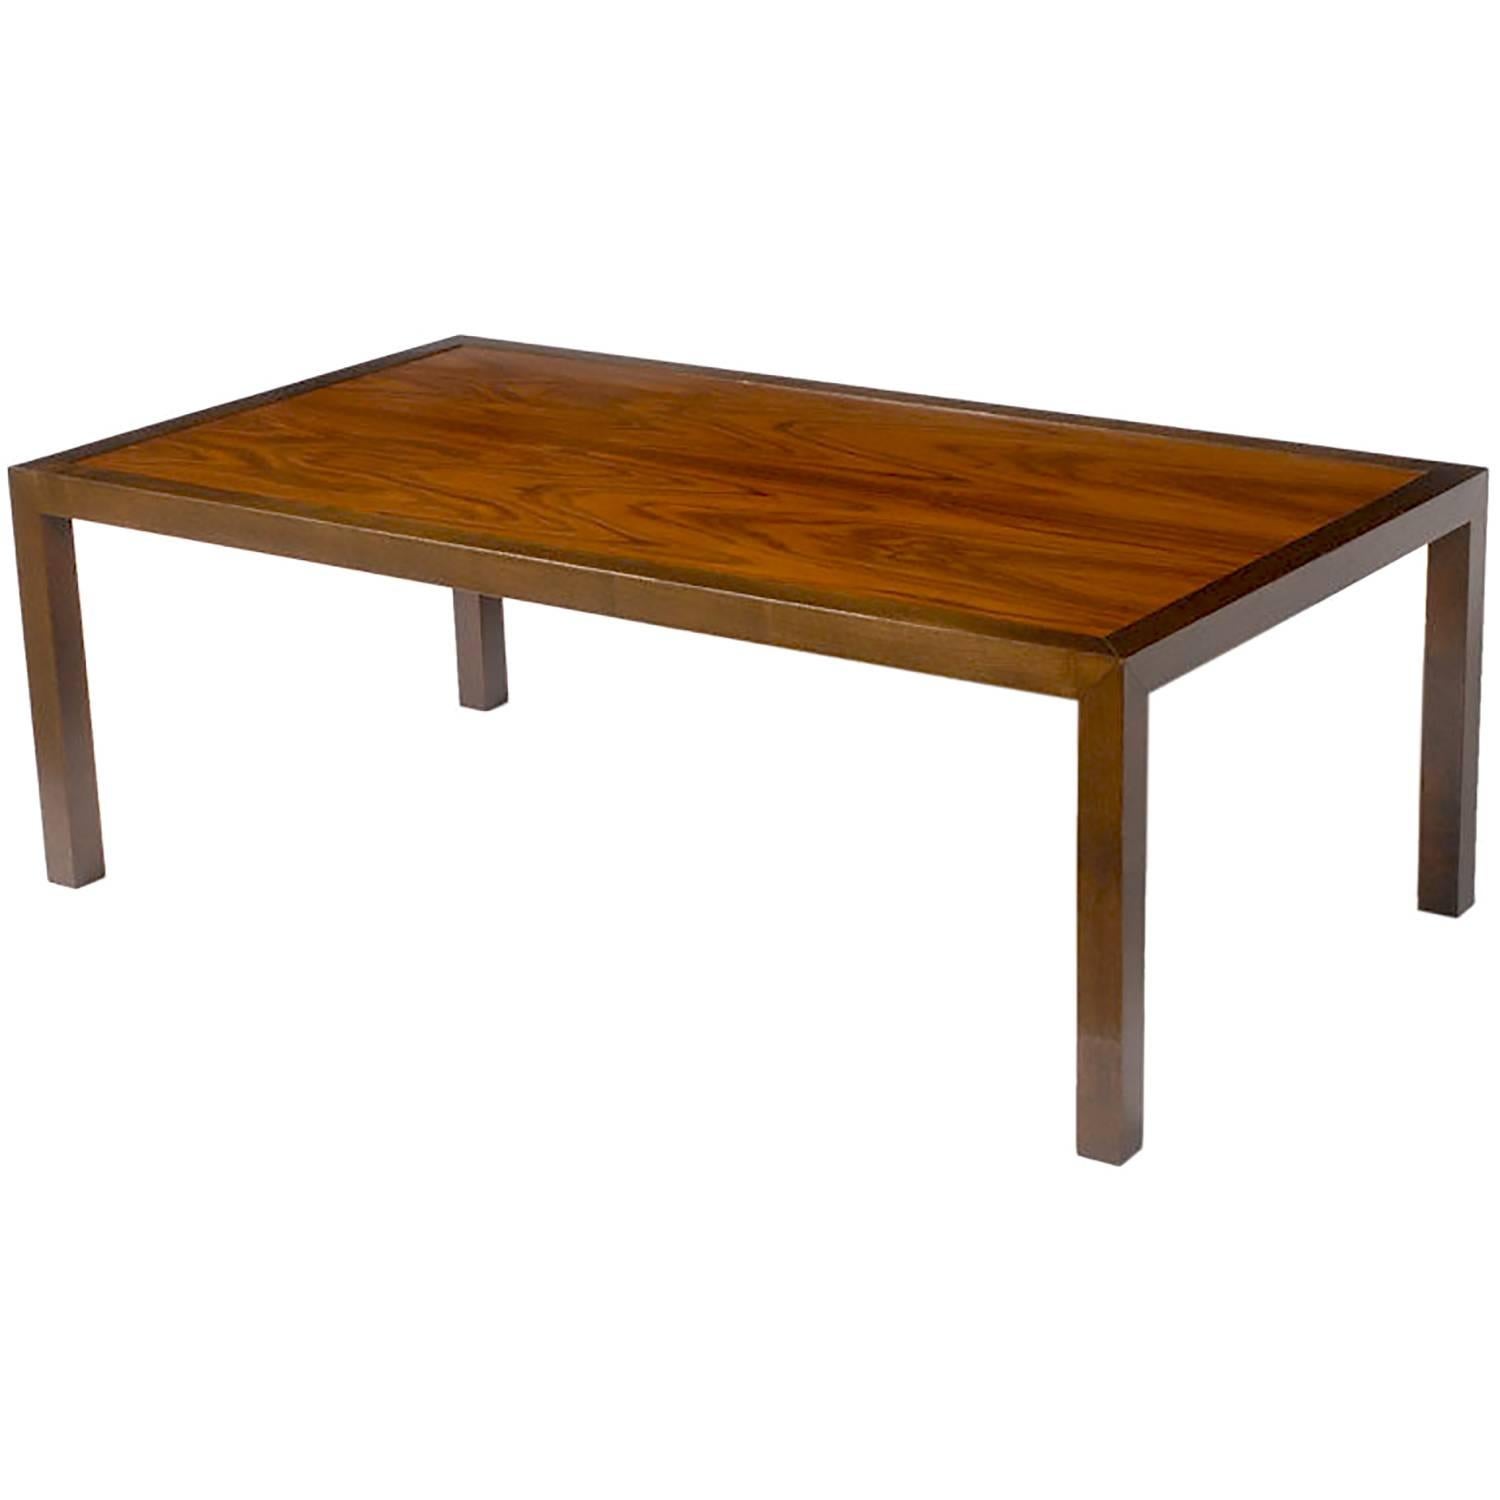 Edward Wormley for Dunbar Parsons style coffee table. Exceptional rosewood grained top with clean lined walnut frame. Transitional piece that could work with many design plans. Gold metal Dunbar label.